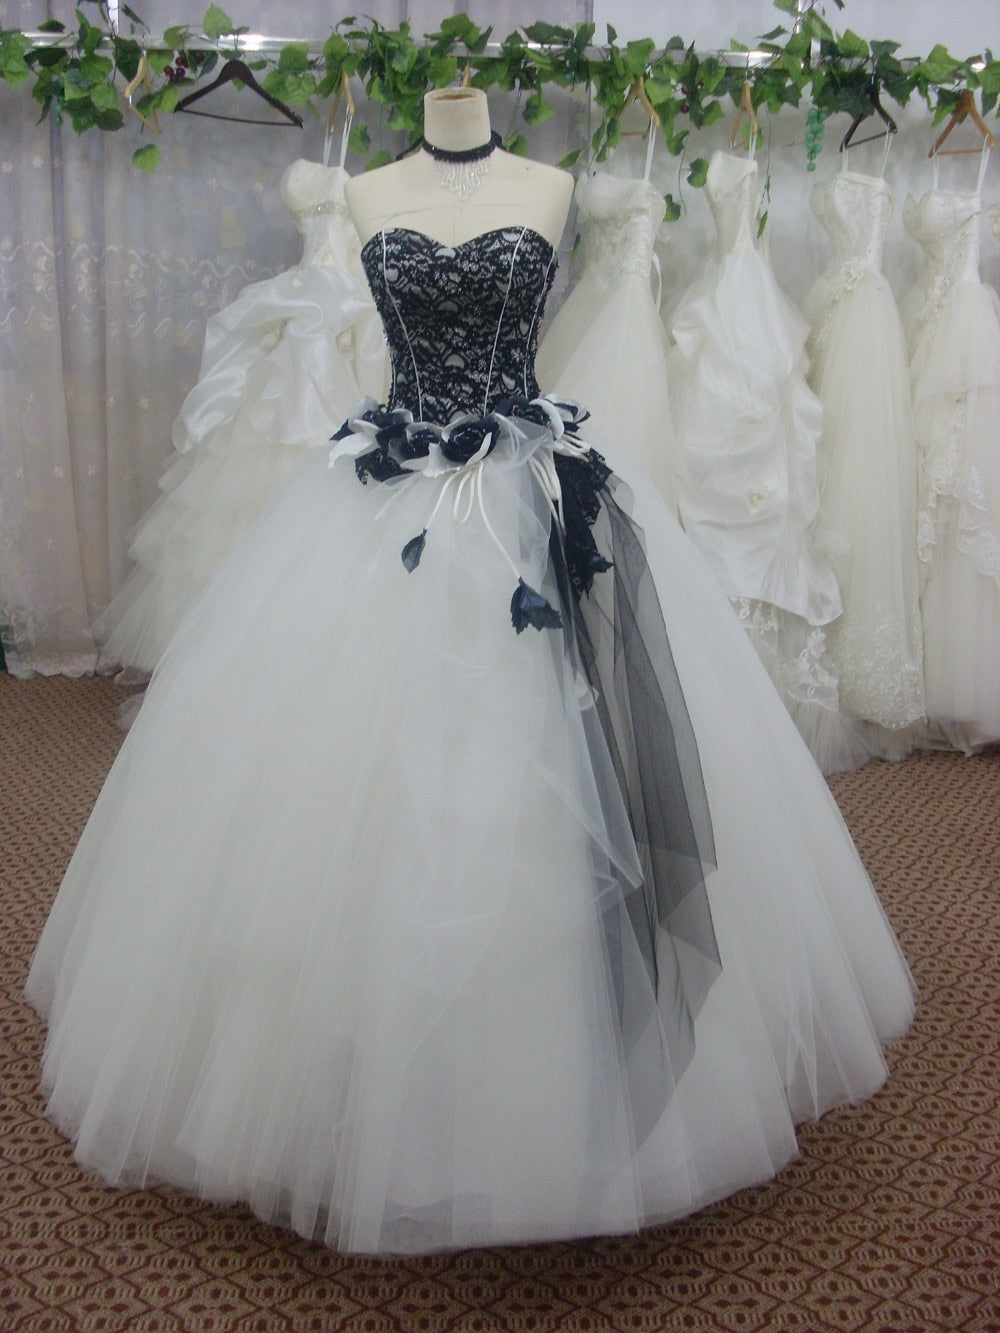 2016 Black and White Tulle Ball Gown Wedding Dress Bridal Gowns/Prom Dresses SL-3940